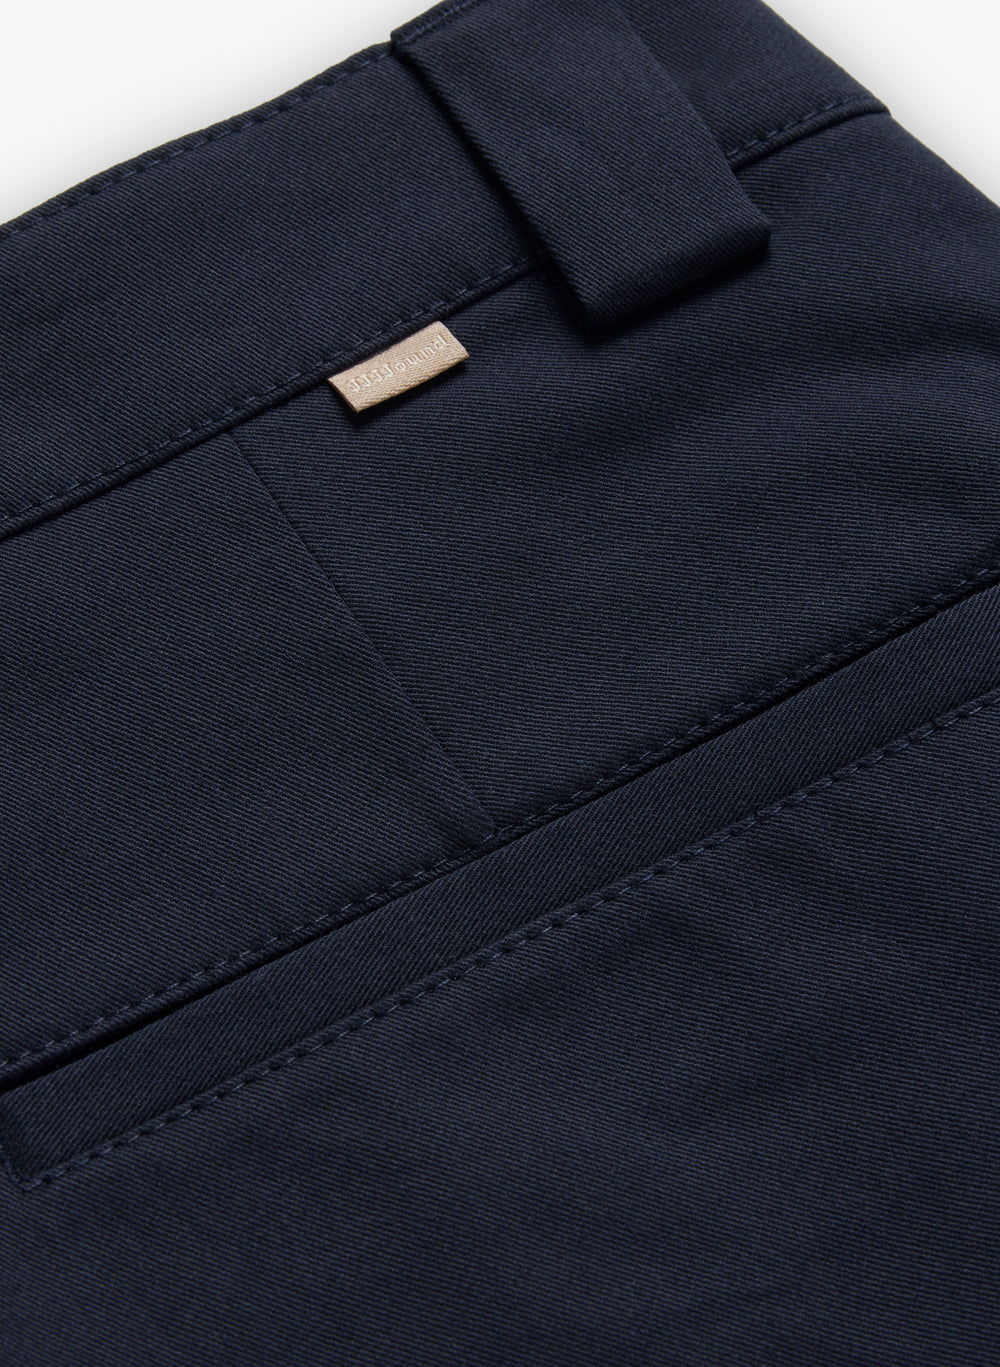 Chino Relaxed - Navy